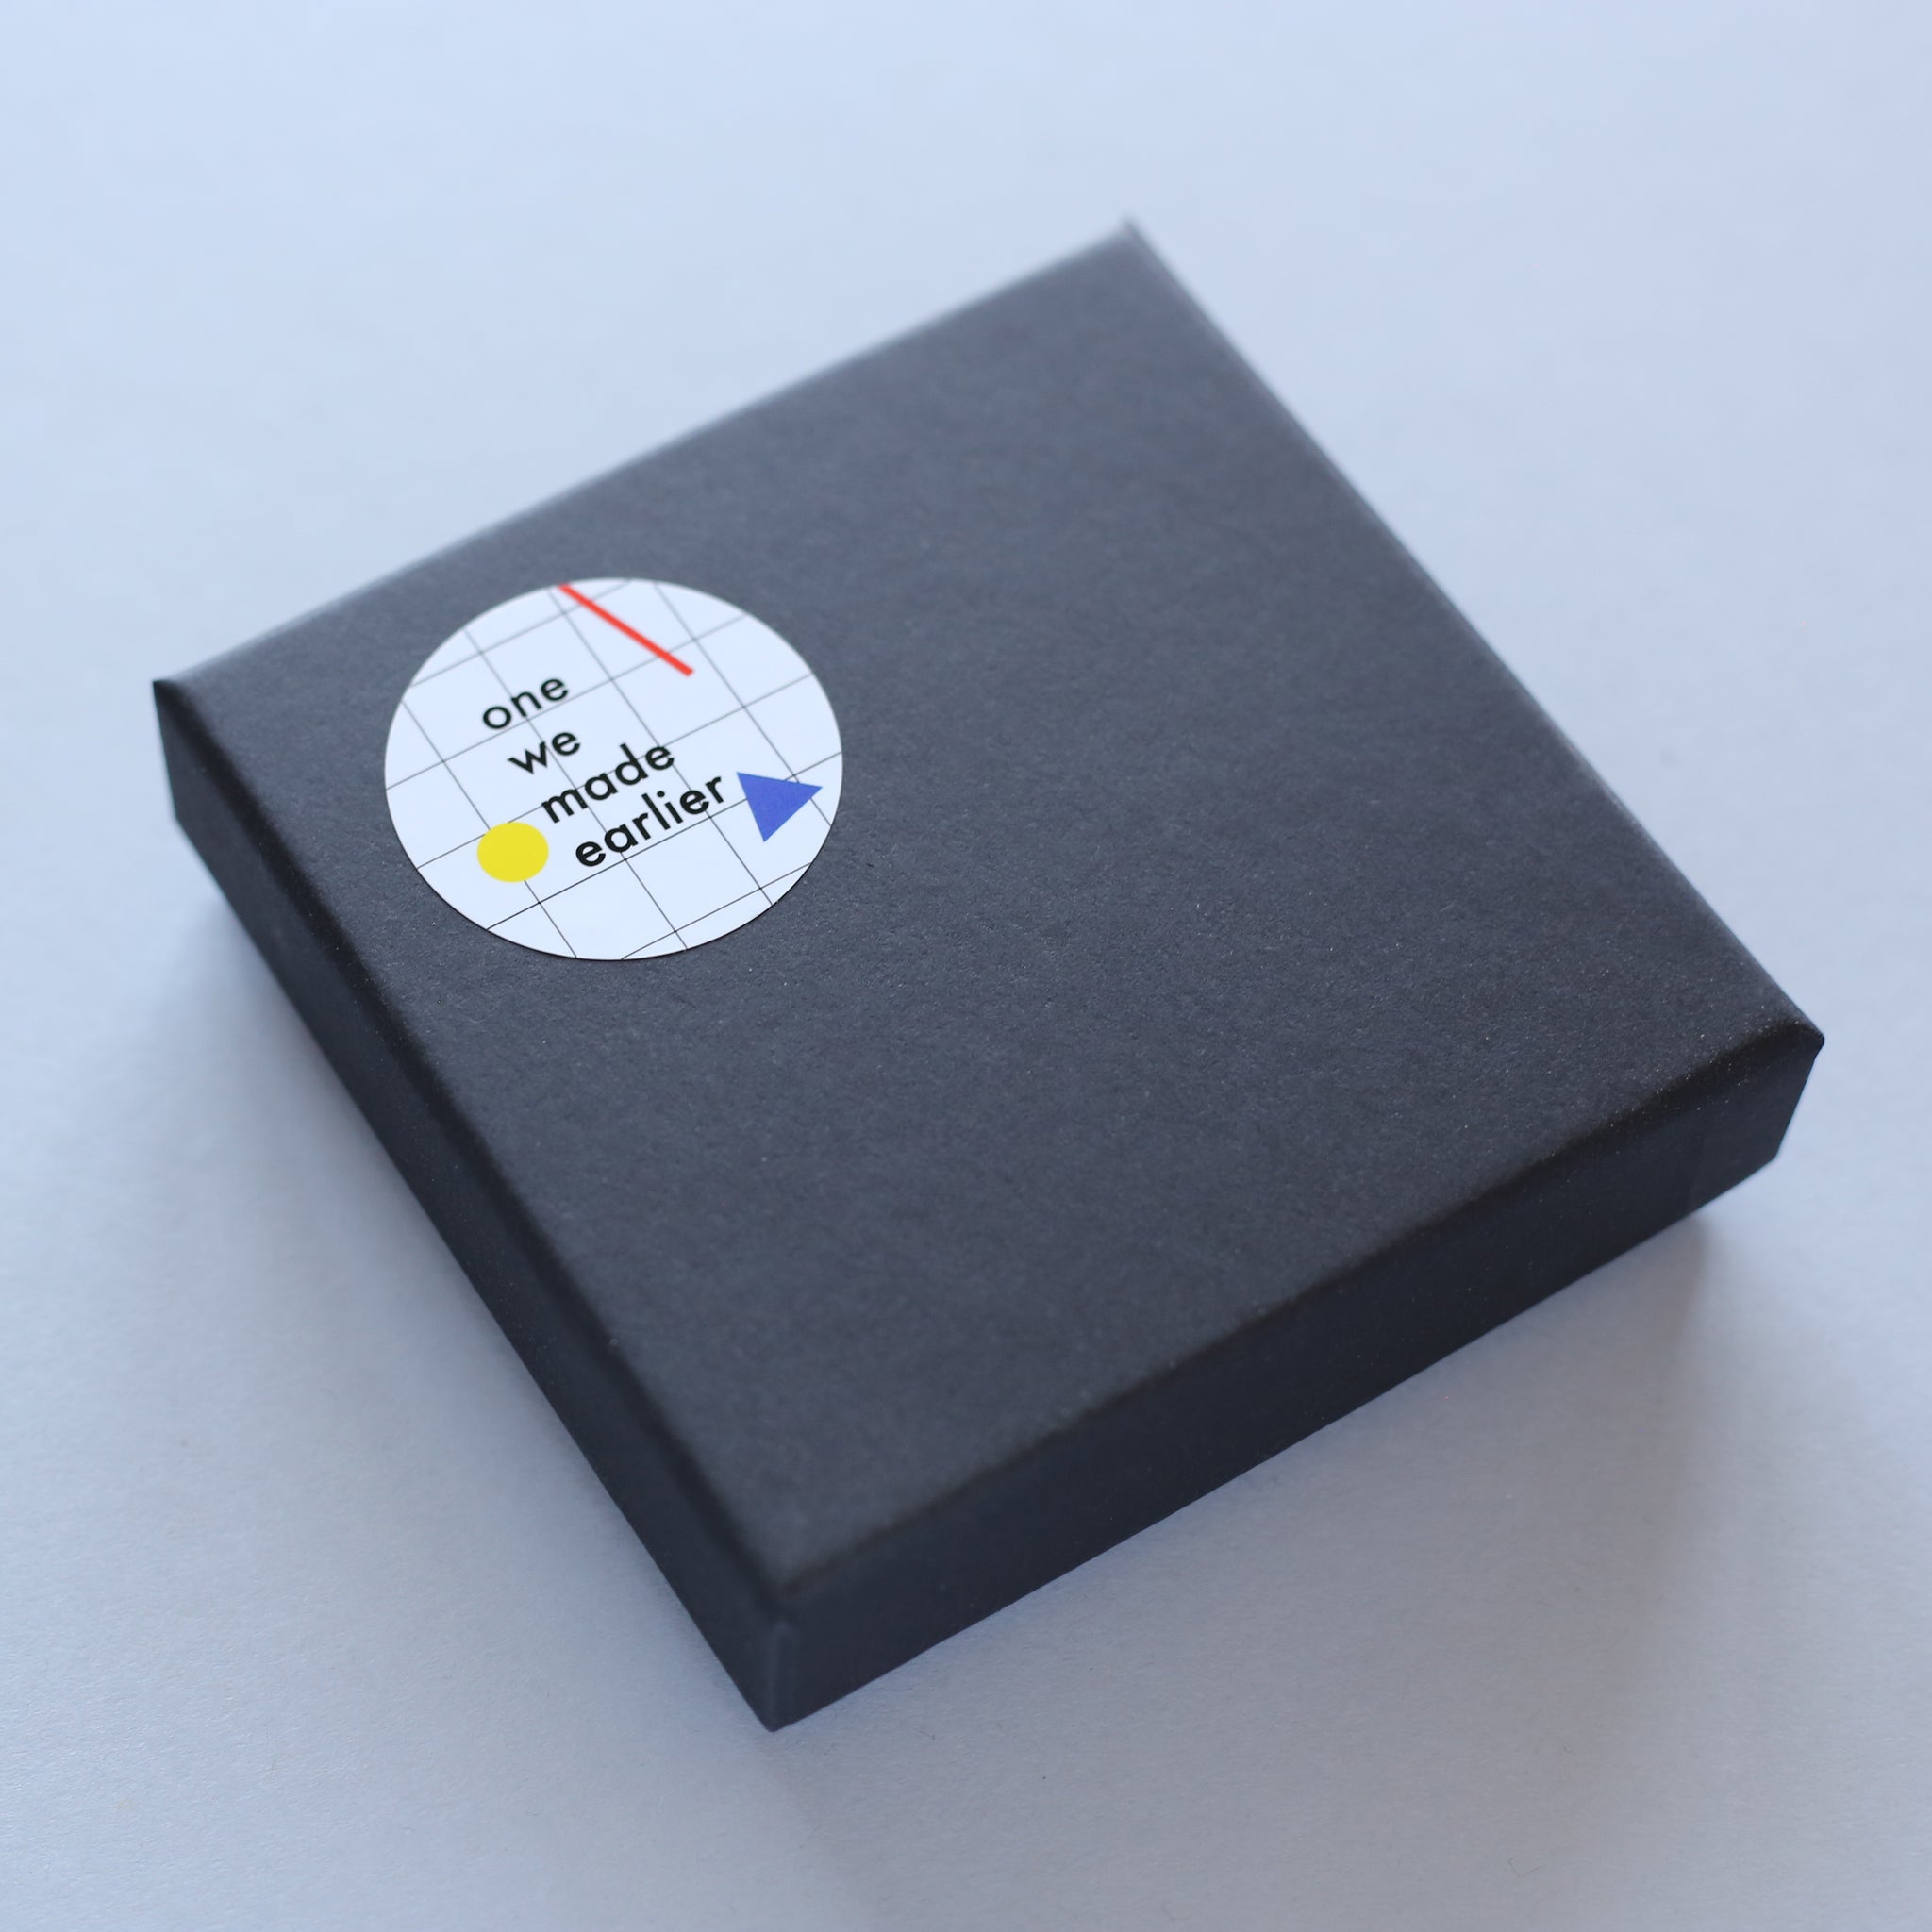 Packaging for Joy brooch by One We Made Earlier